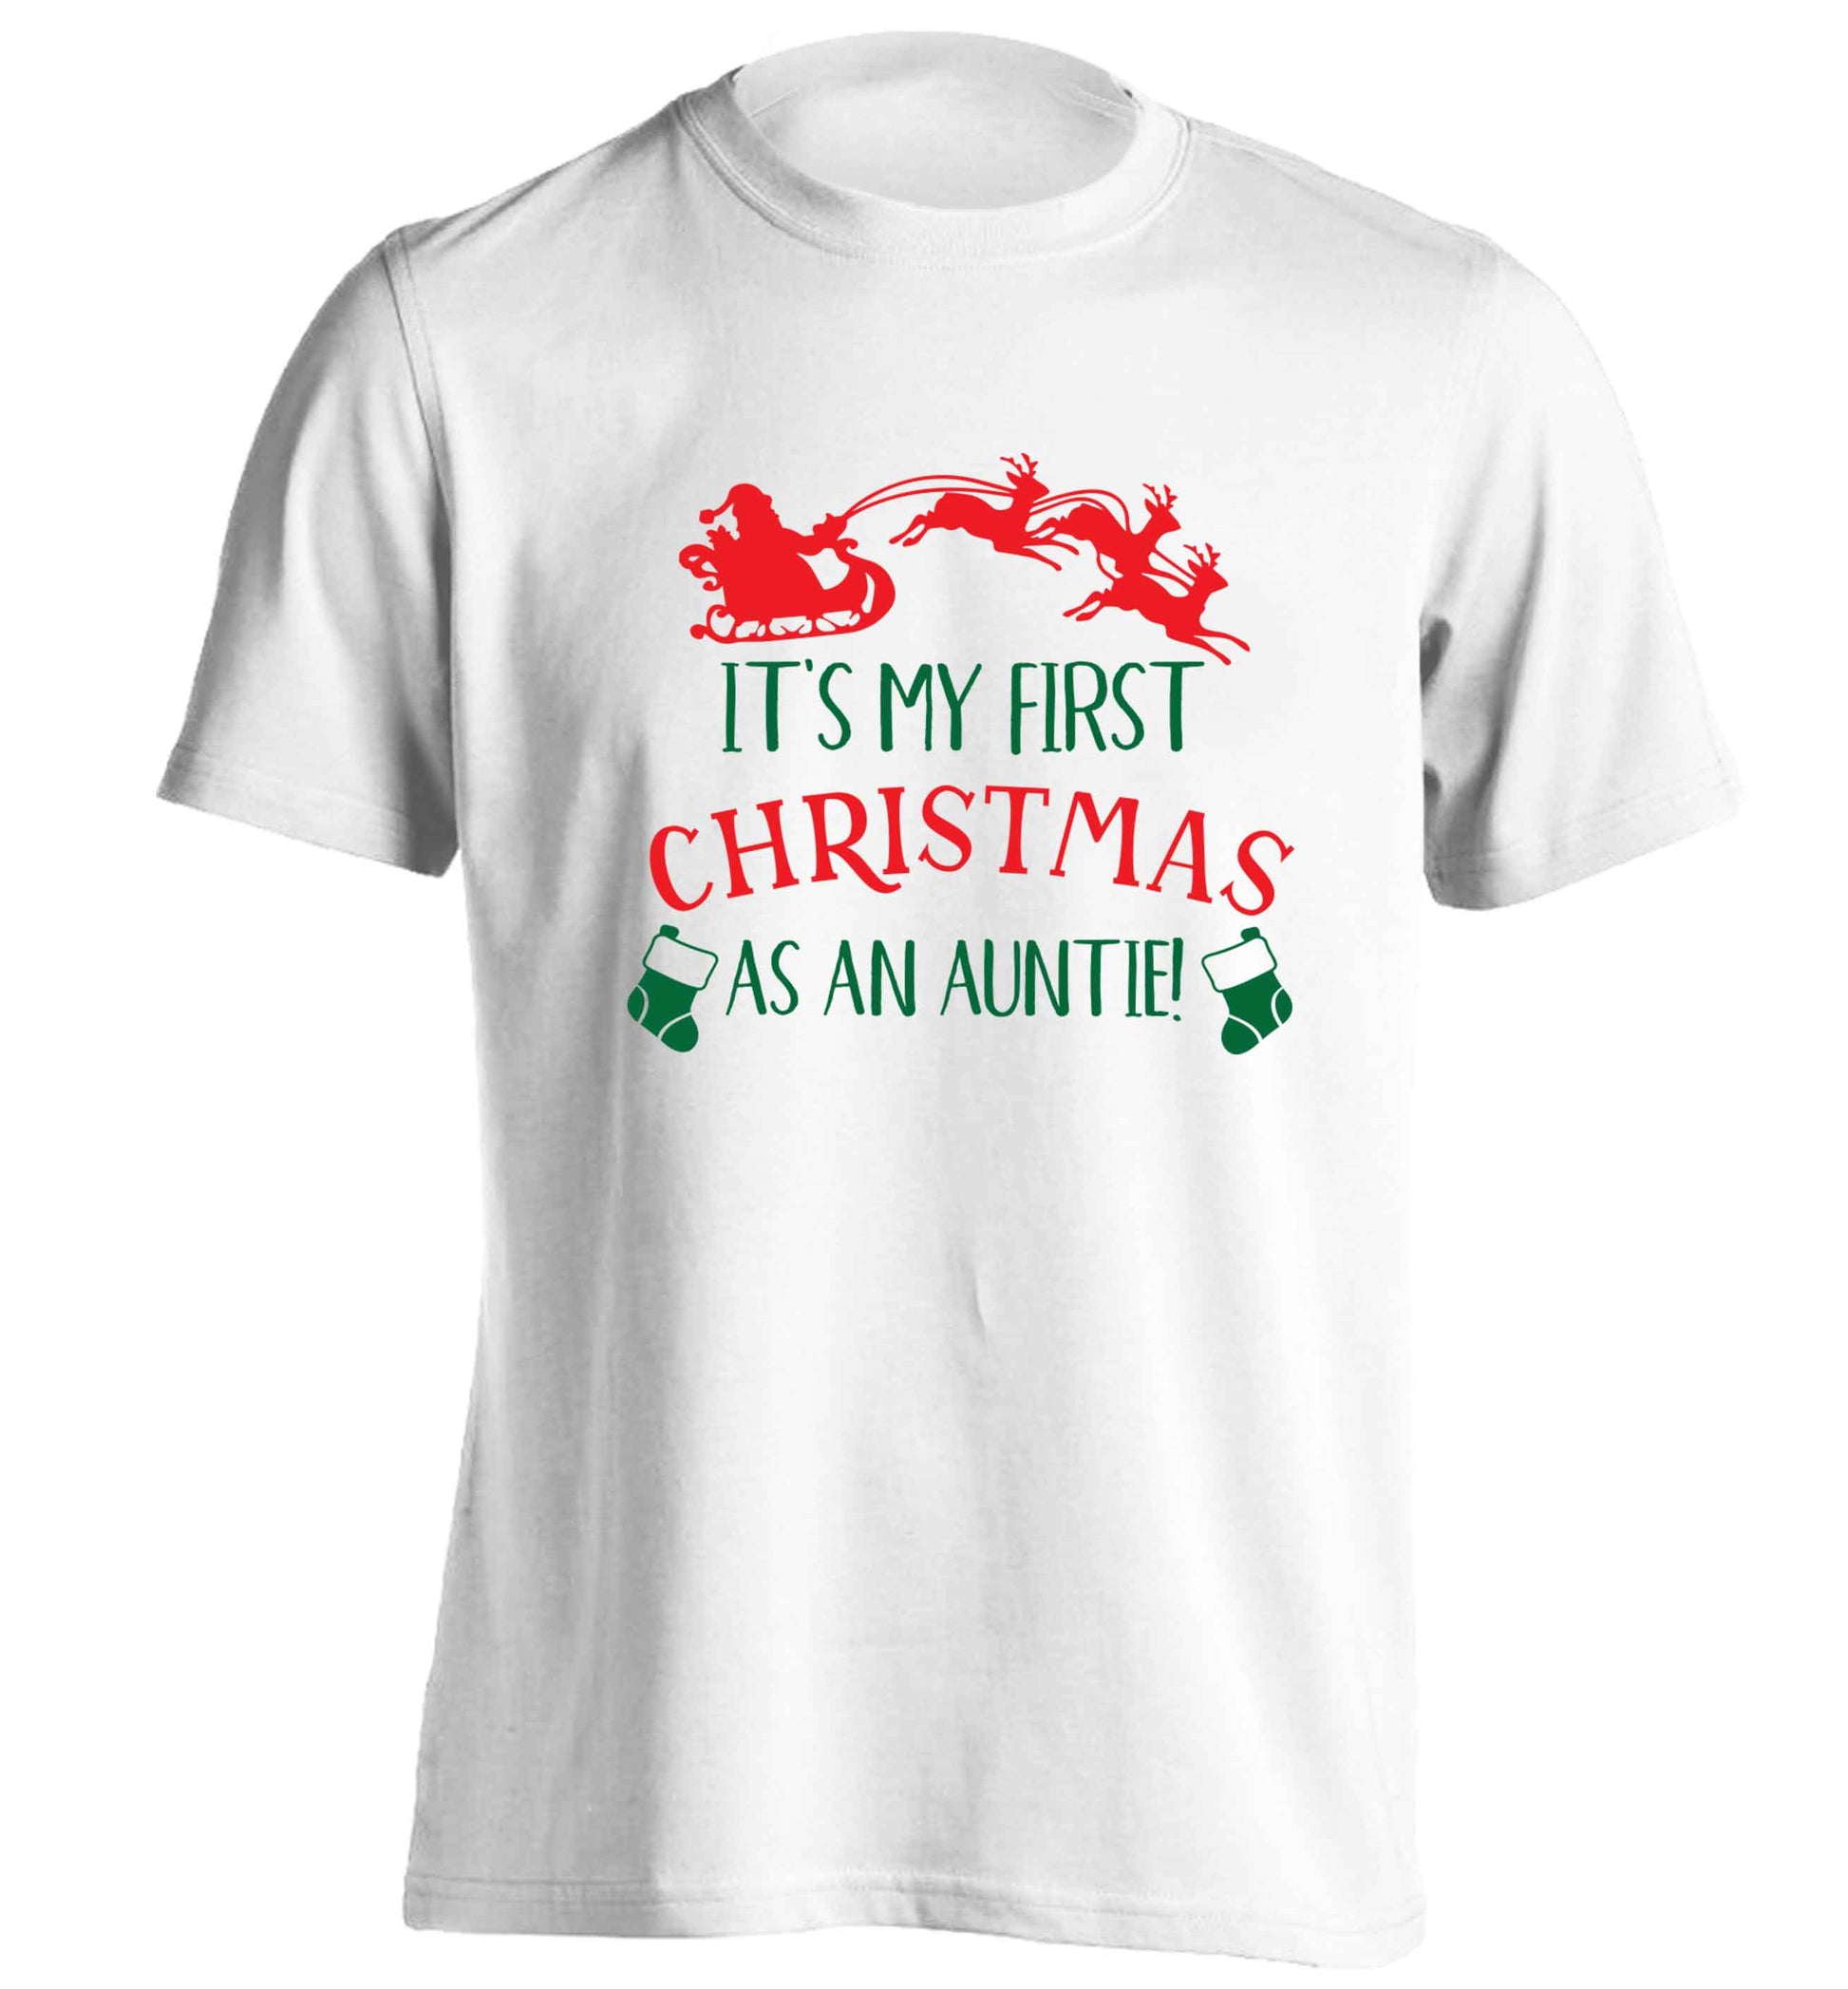 It's my first Christmas as an auntie! adults unisex white Tshirt 2XL